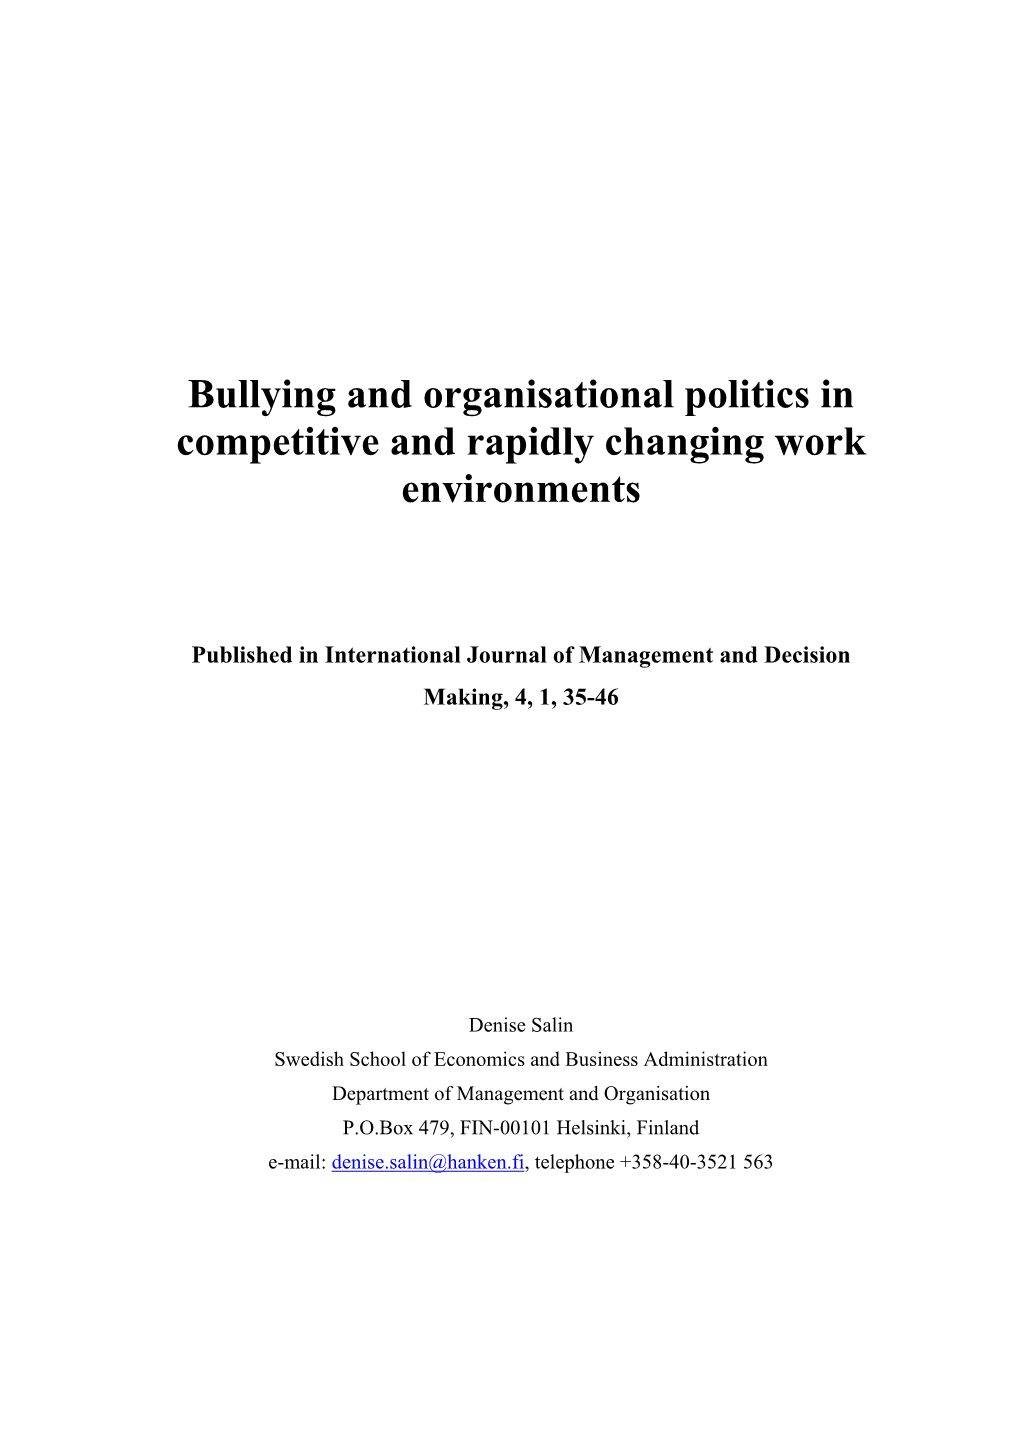 Workplace Bullying As a Form of Organisational Politics